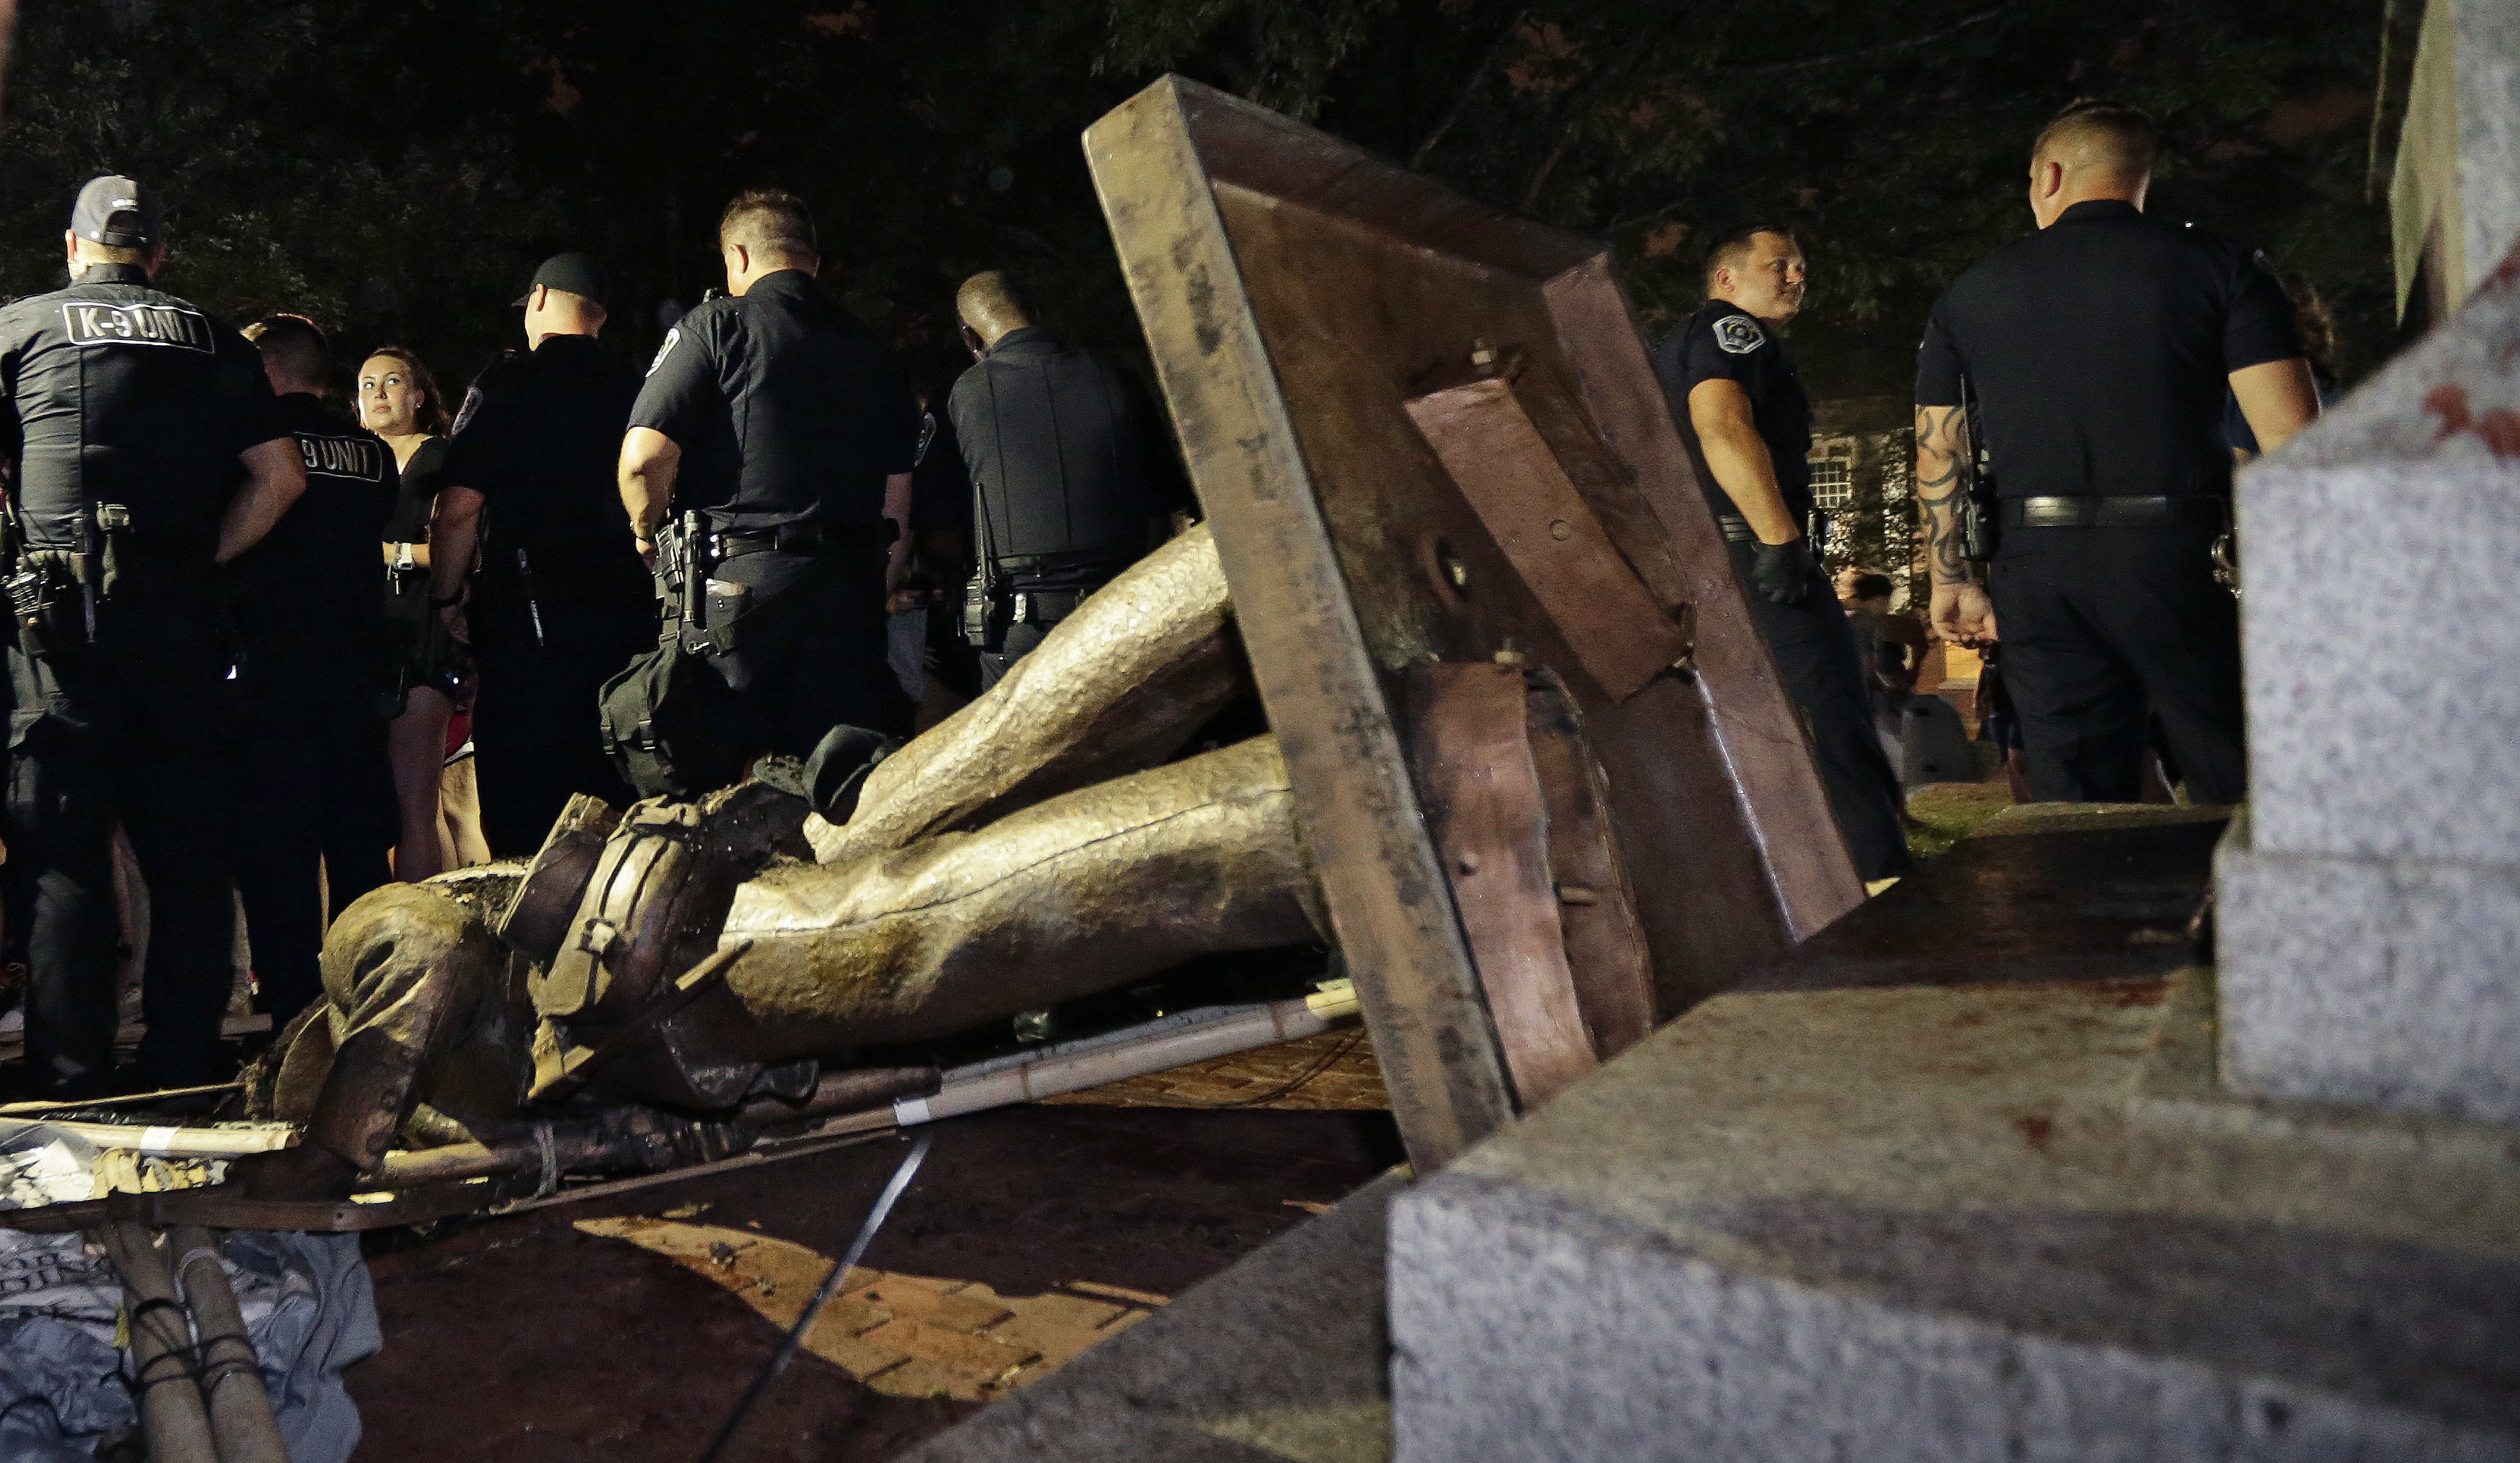 Police stand guard after the Confederate statue known as Silent Sam was toppled by protesters on campus at the University of North Carolina in Chapel Hill, N.C., on Aug. 20, 2018.